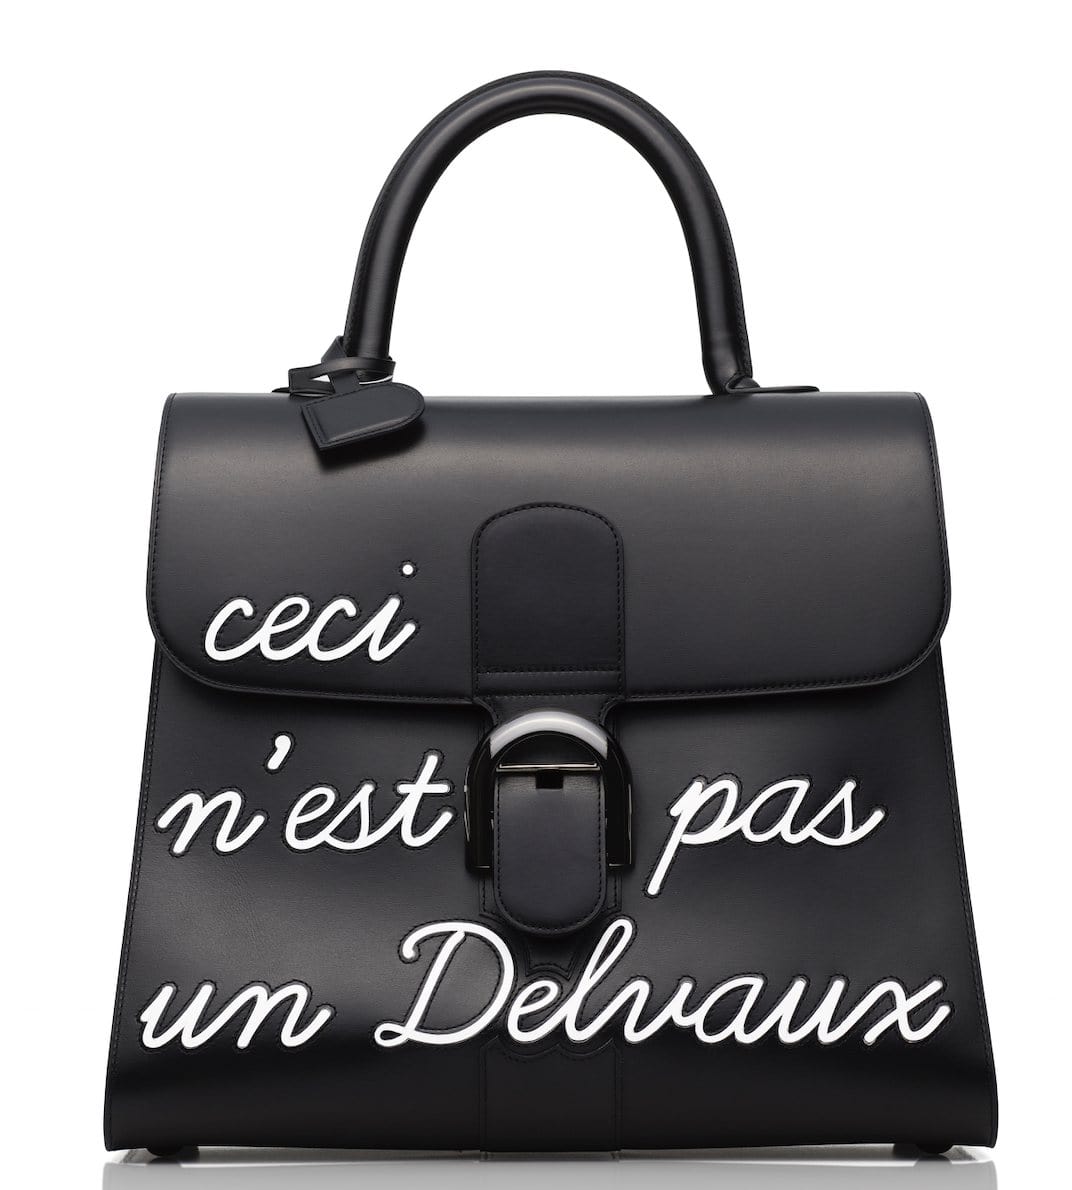 Older than Belgium, Brussels-based leather goods maker Delvaux is for sale